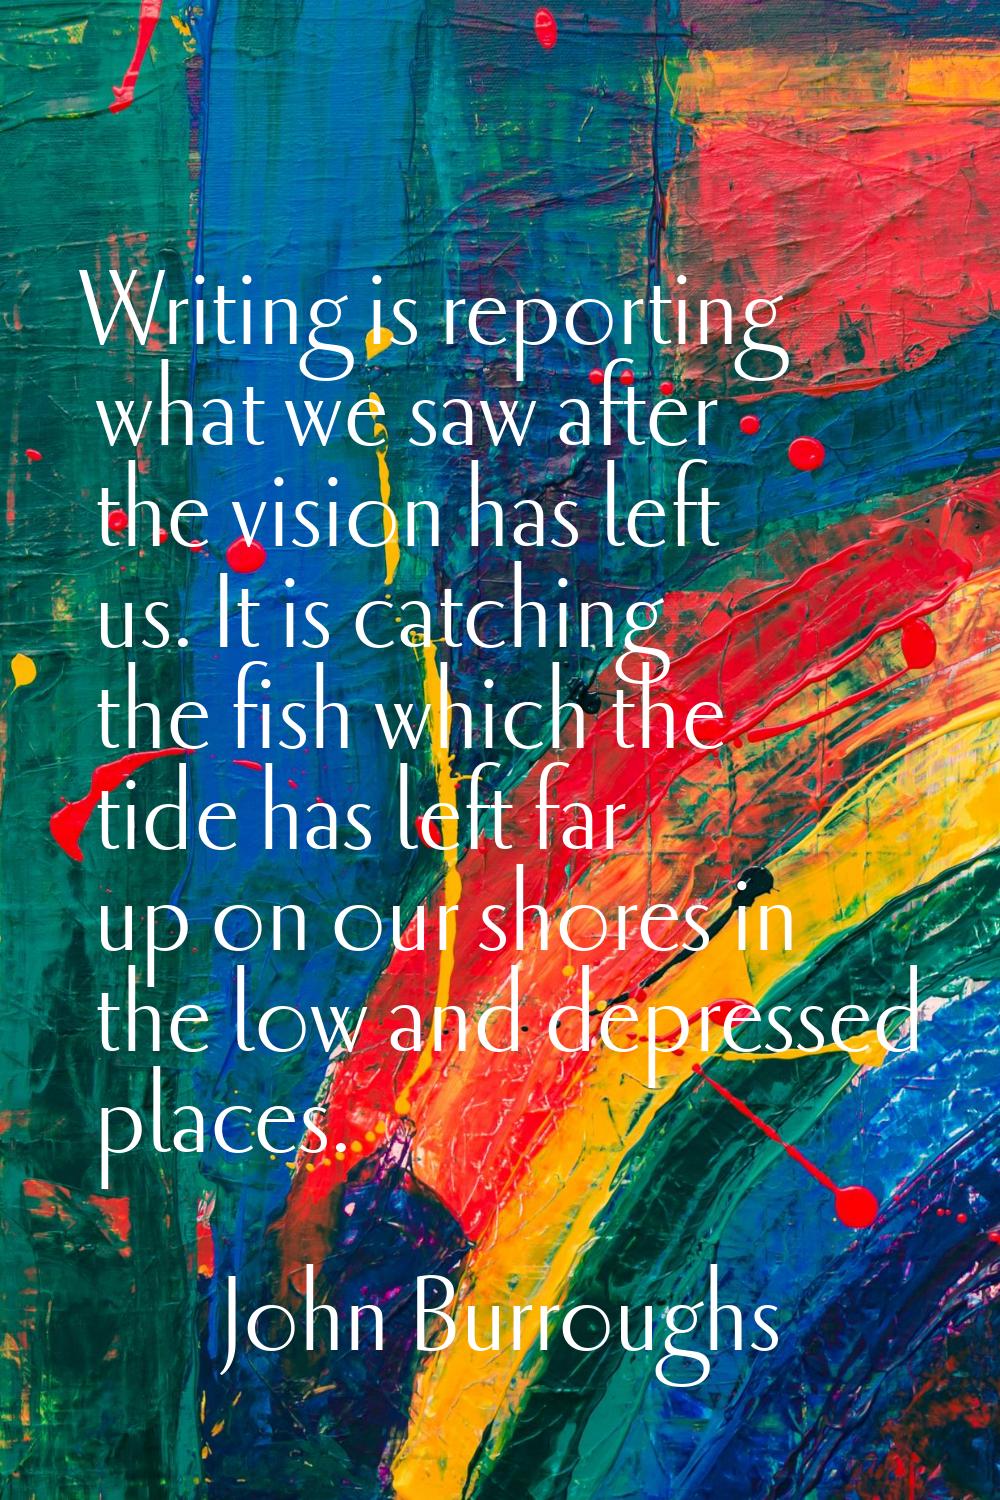 Writing is reporting what we saw after the vision has left us. It is catching the fish which the ti